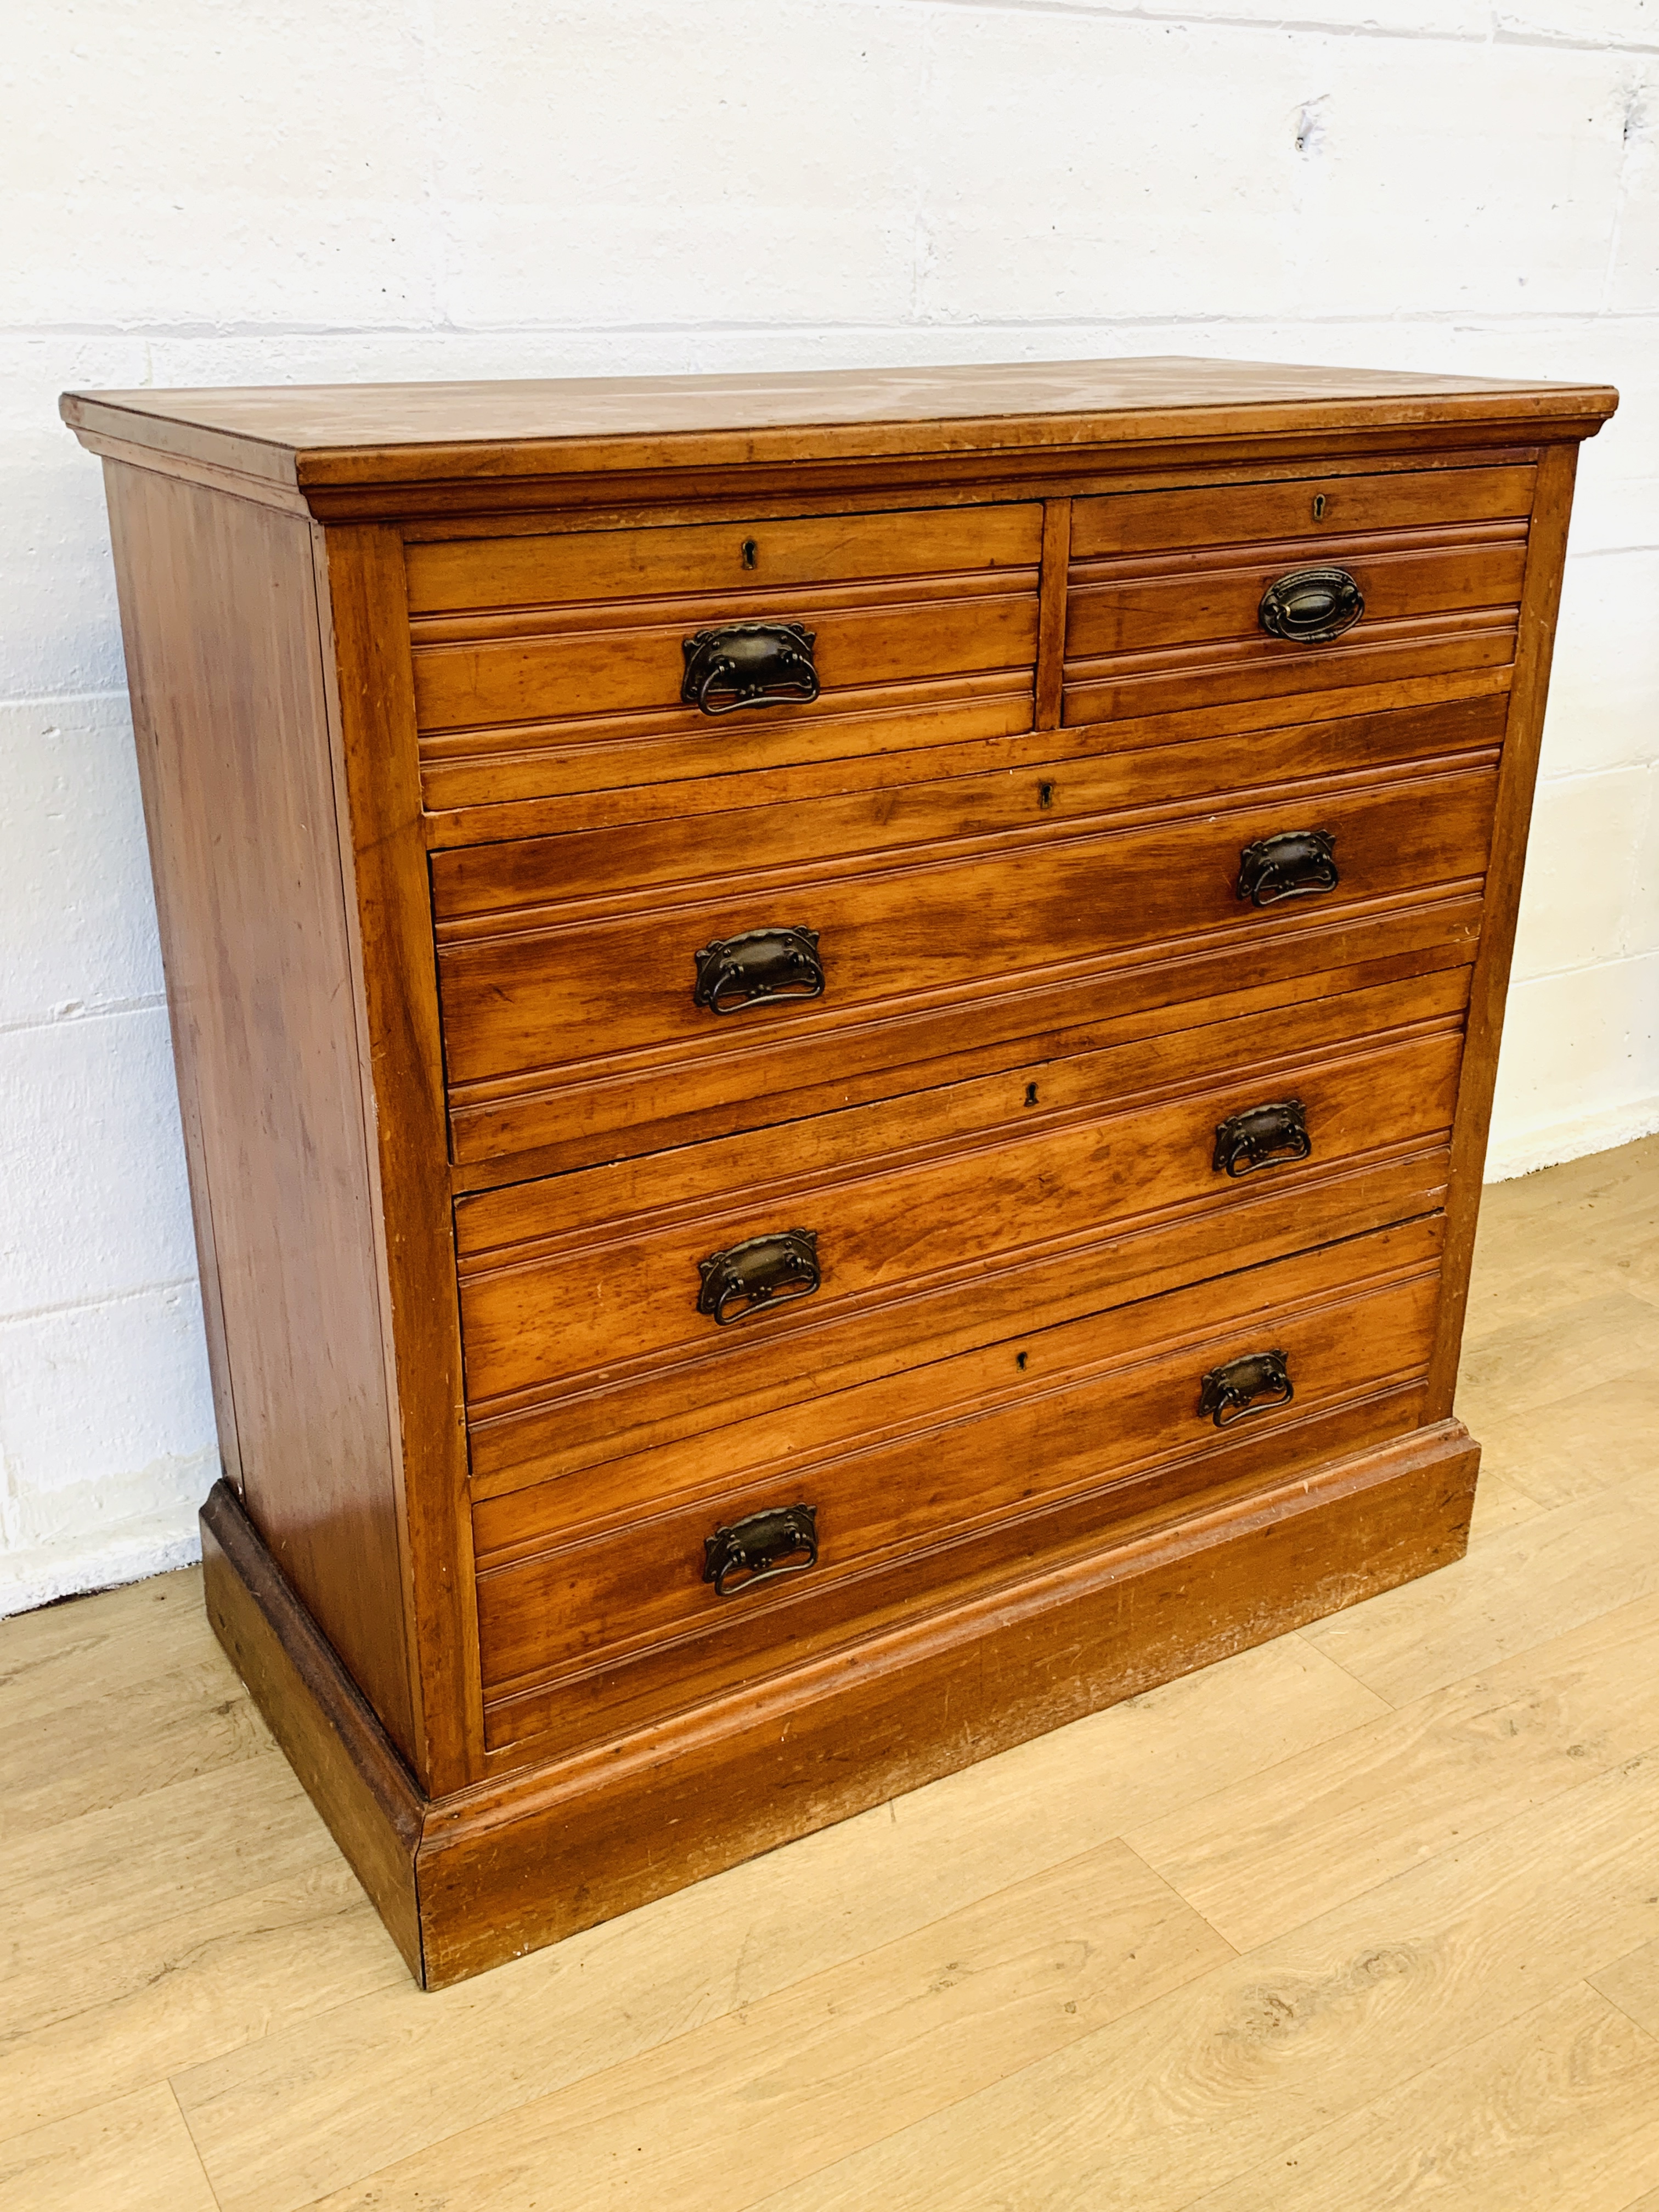 Mahogany chest of drawers - Image 5 of 5